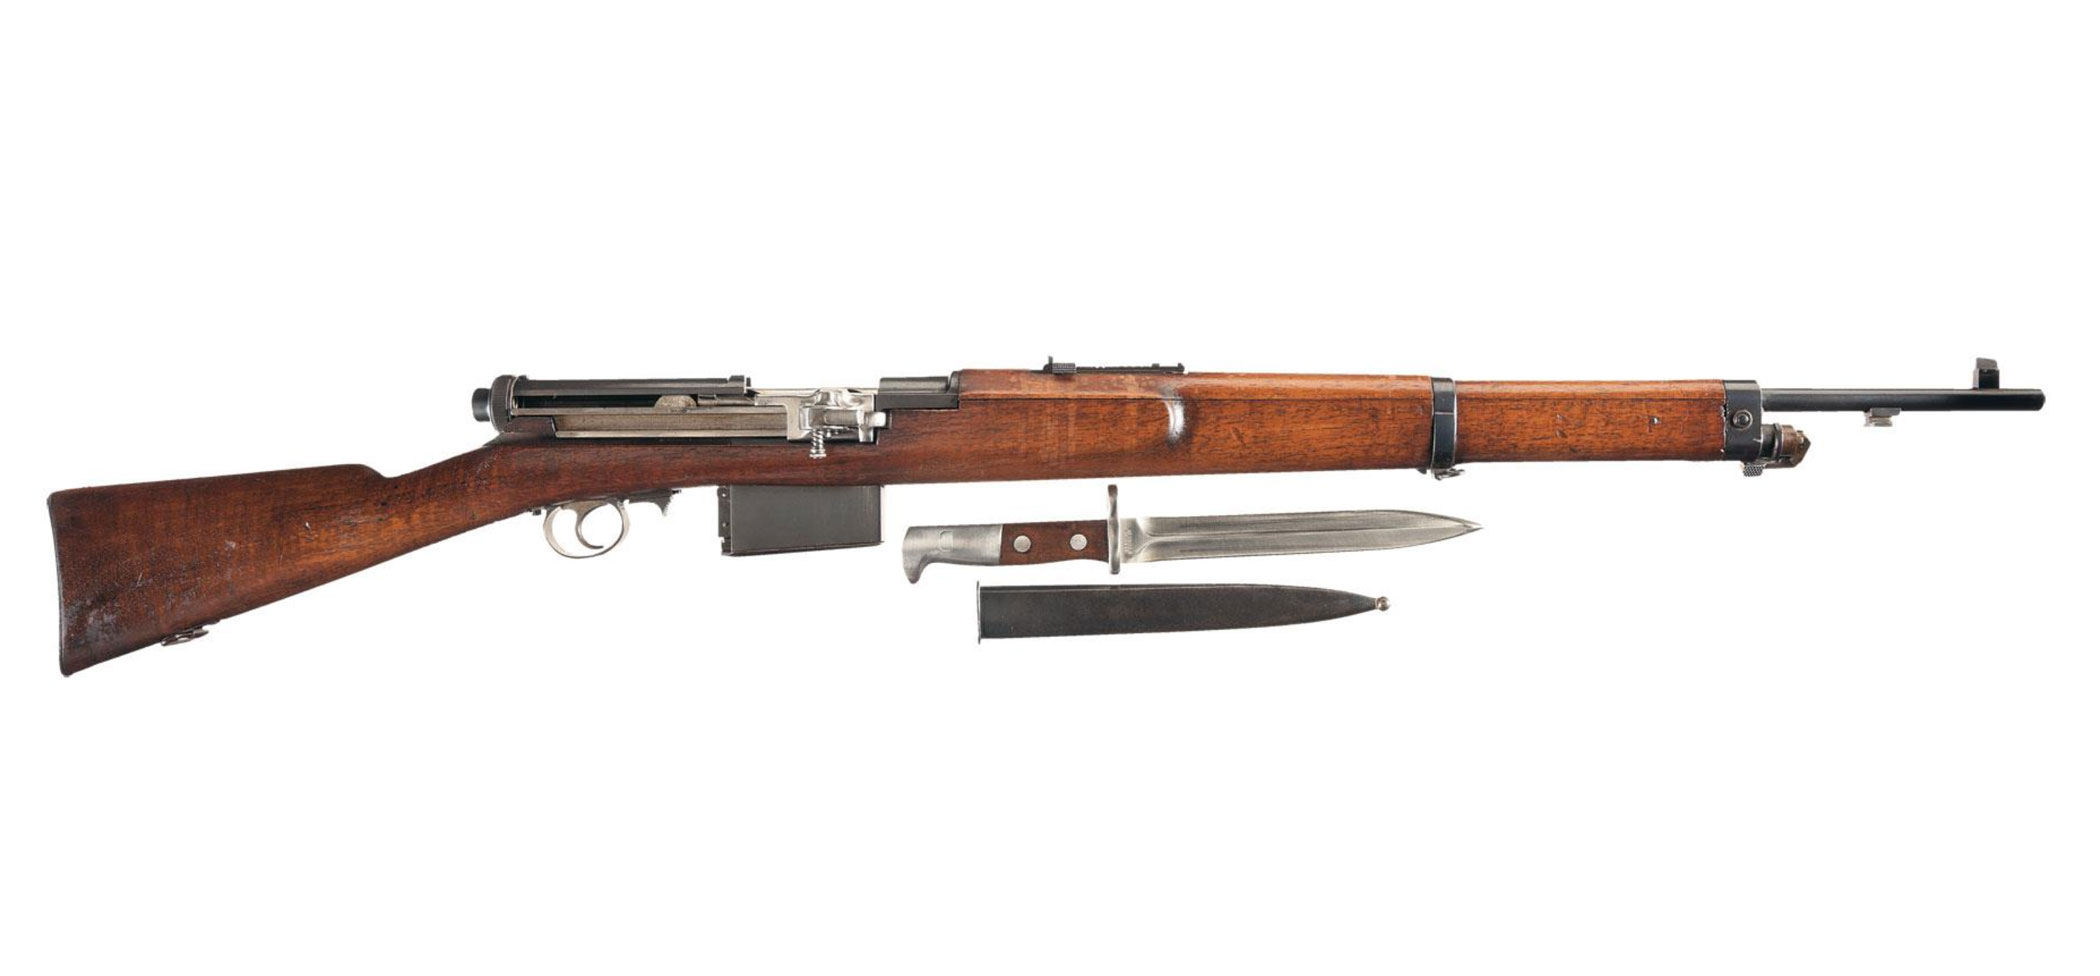 the mondragon rifle was an early piece of sig sauer history